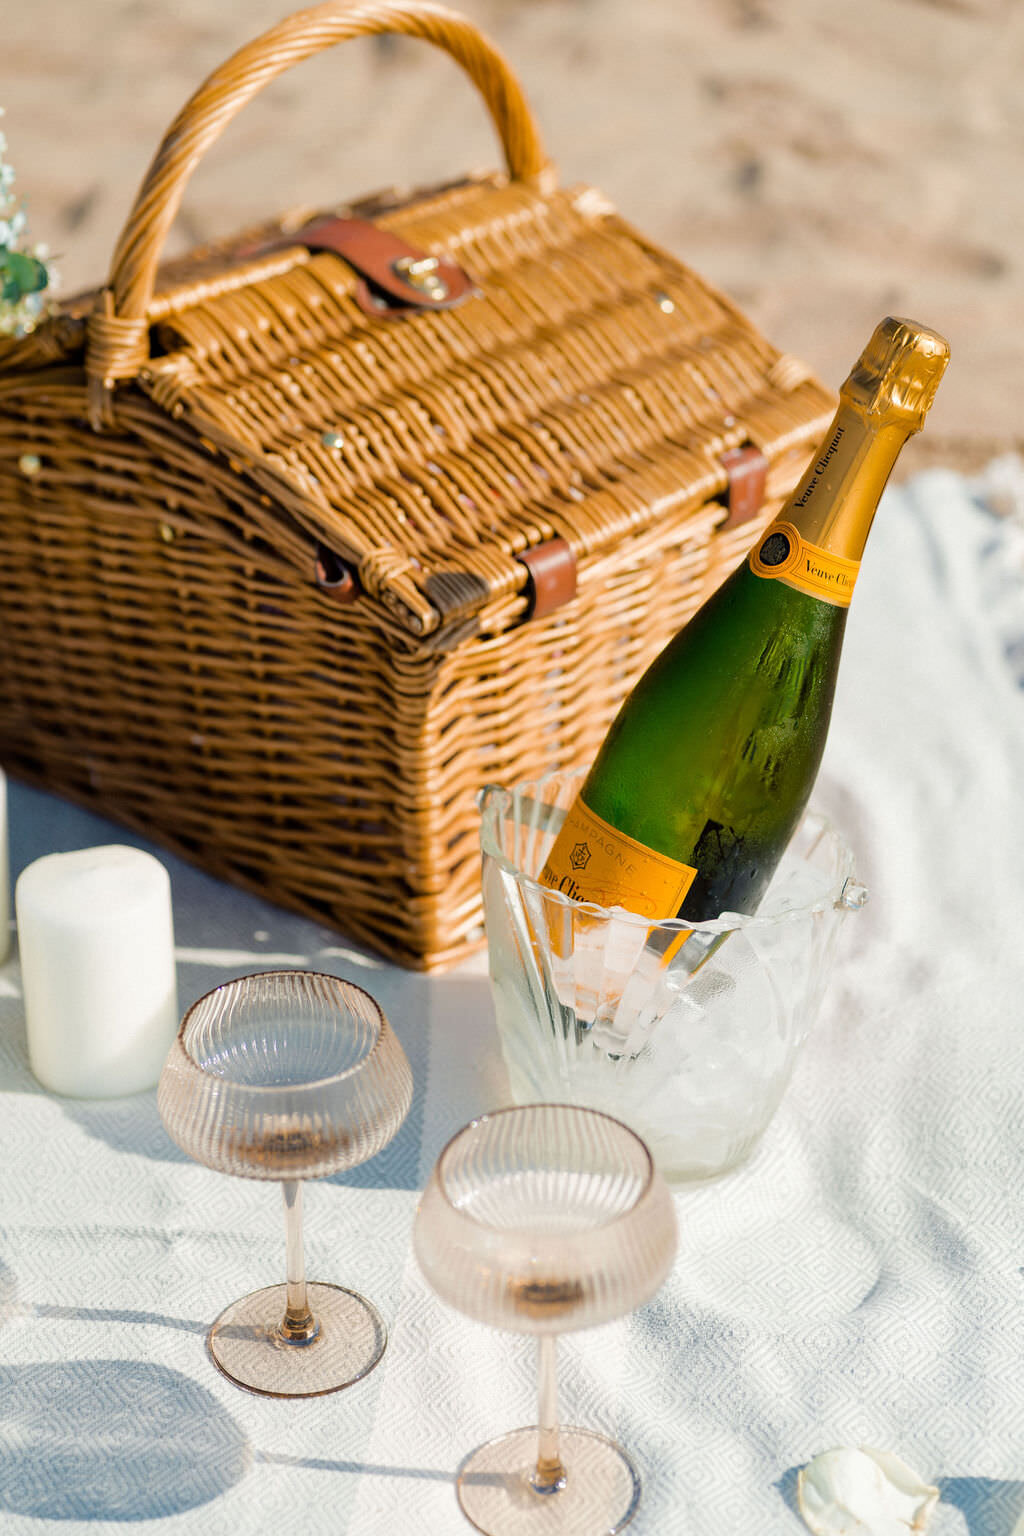 champagne glasses, a champagne bottle on ice, candles, and a picnic basket laid out on a blanket